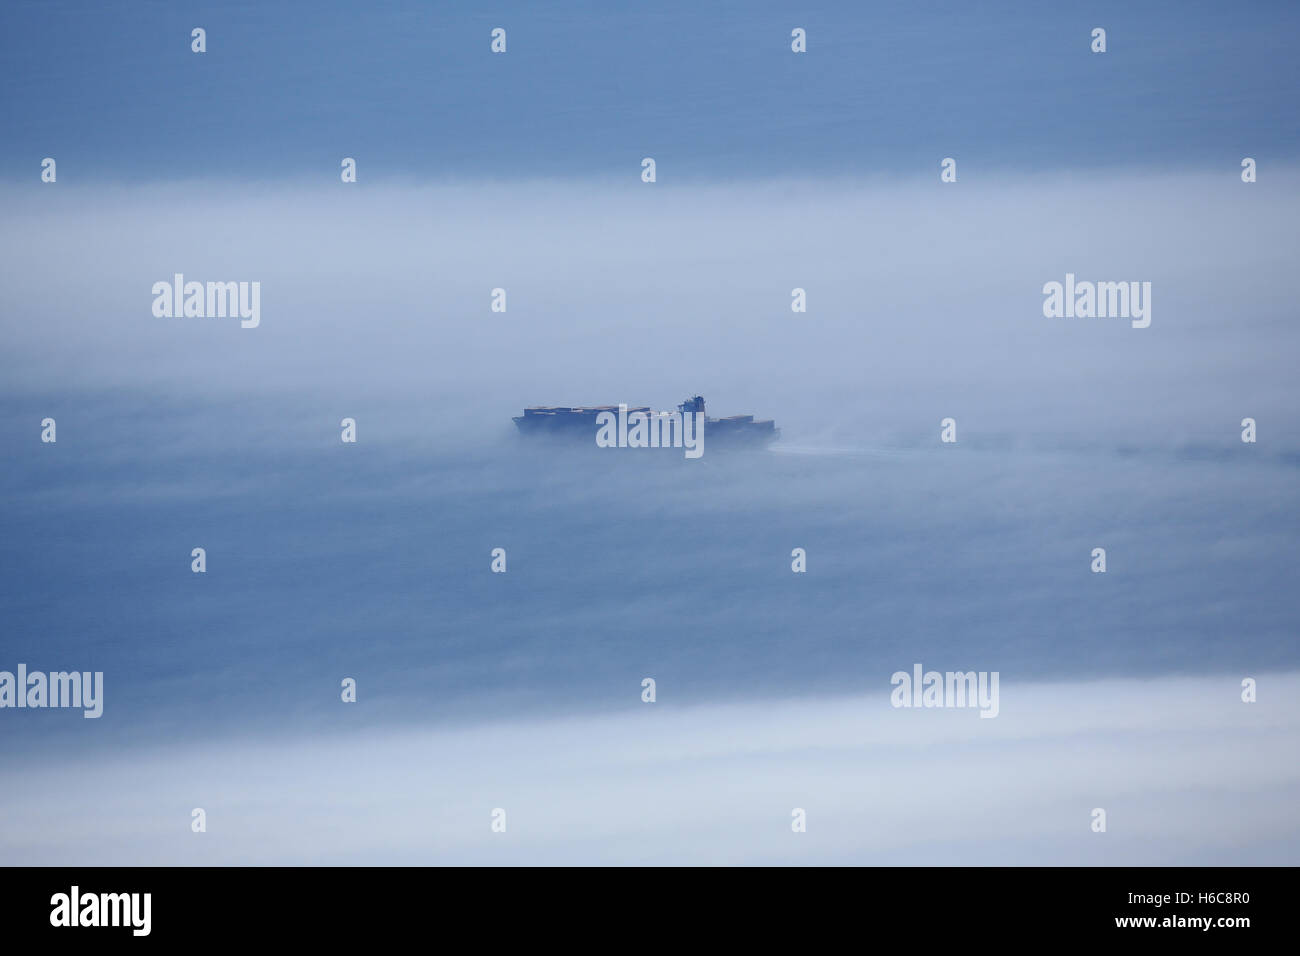 A cargo container ship sailing up the English Channel (La Manche) eastbound surrounded by low cloud and sea mist. Stock Photo